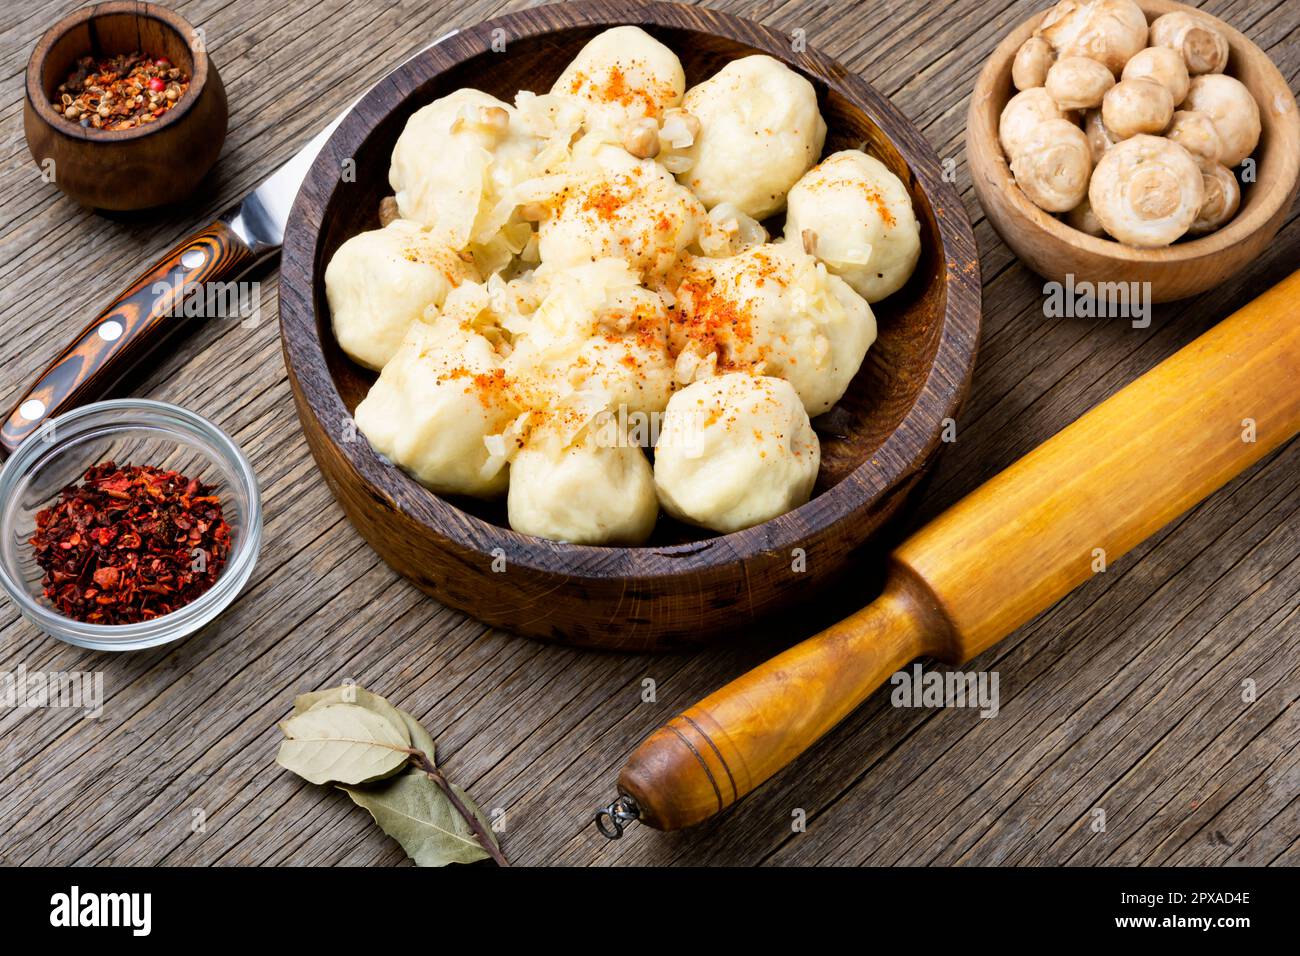 Knedliki, made from dough, potatoes with mushroom filling. Czech cuisine, rustic style Stock Photo